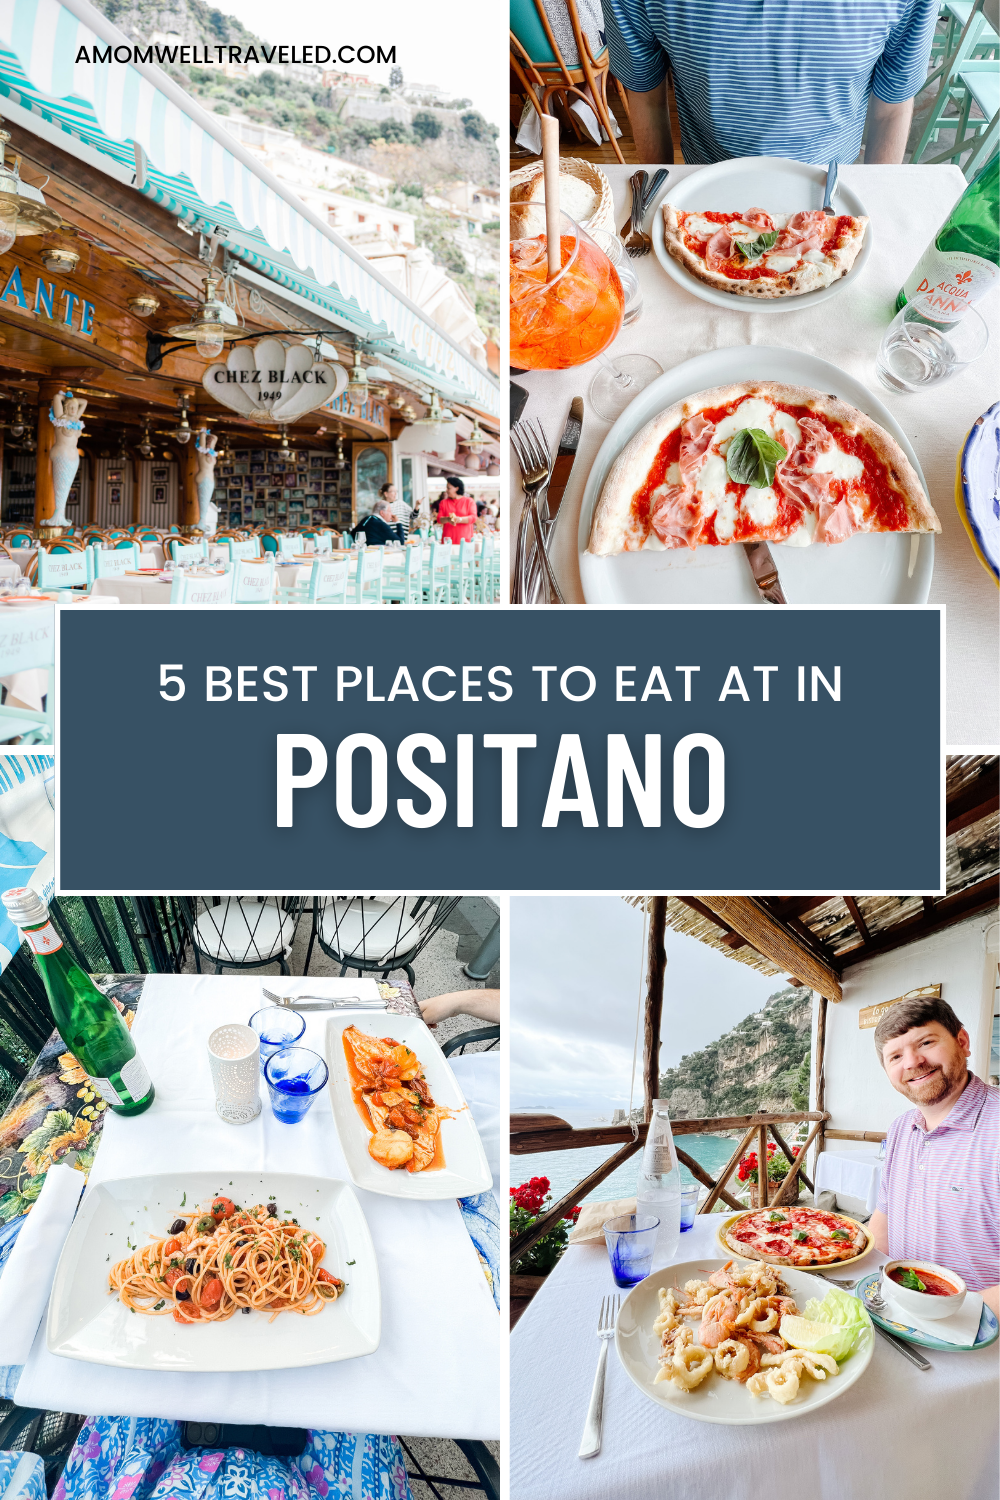 Pinterest Pin for 5 best places to eat in Positano from A Mom Well Traveled blog featuring foods from various restaurants in Positano